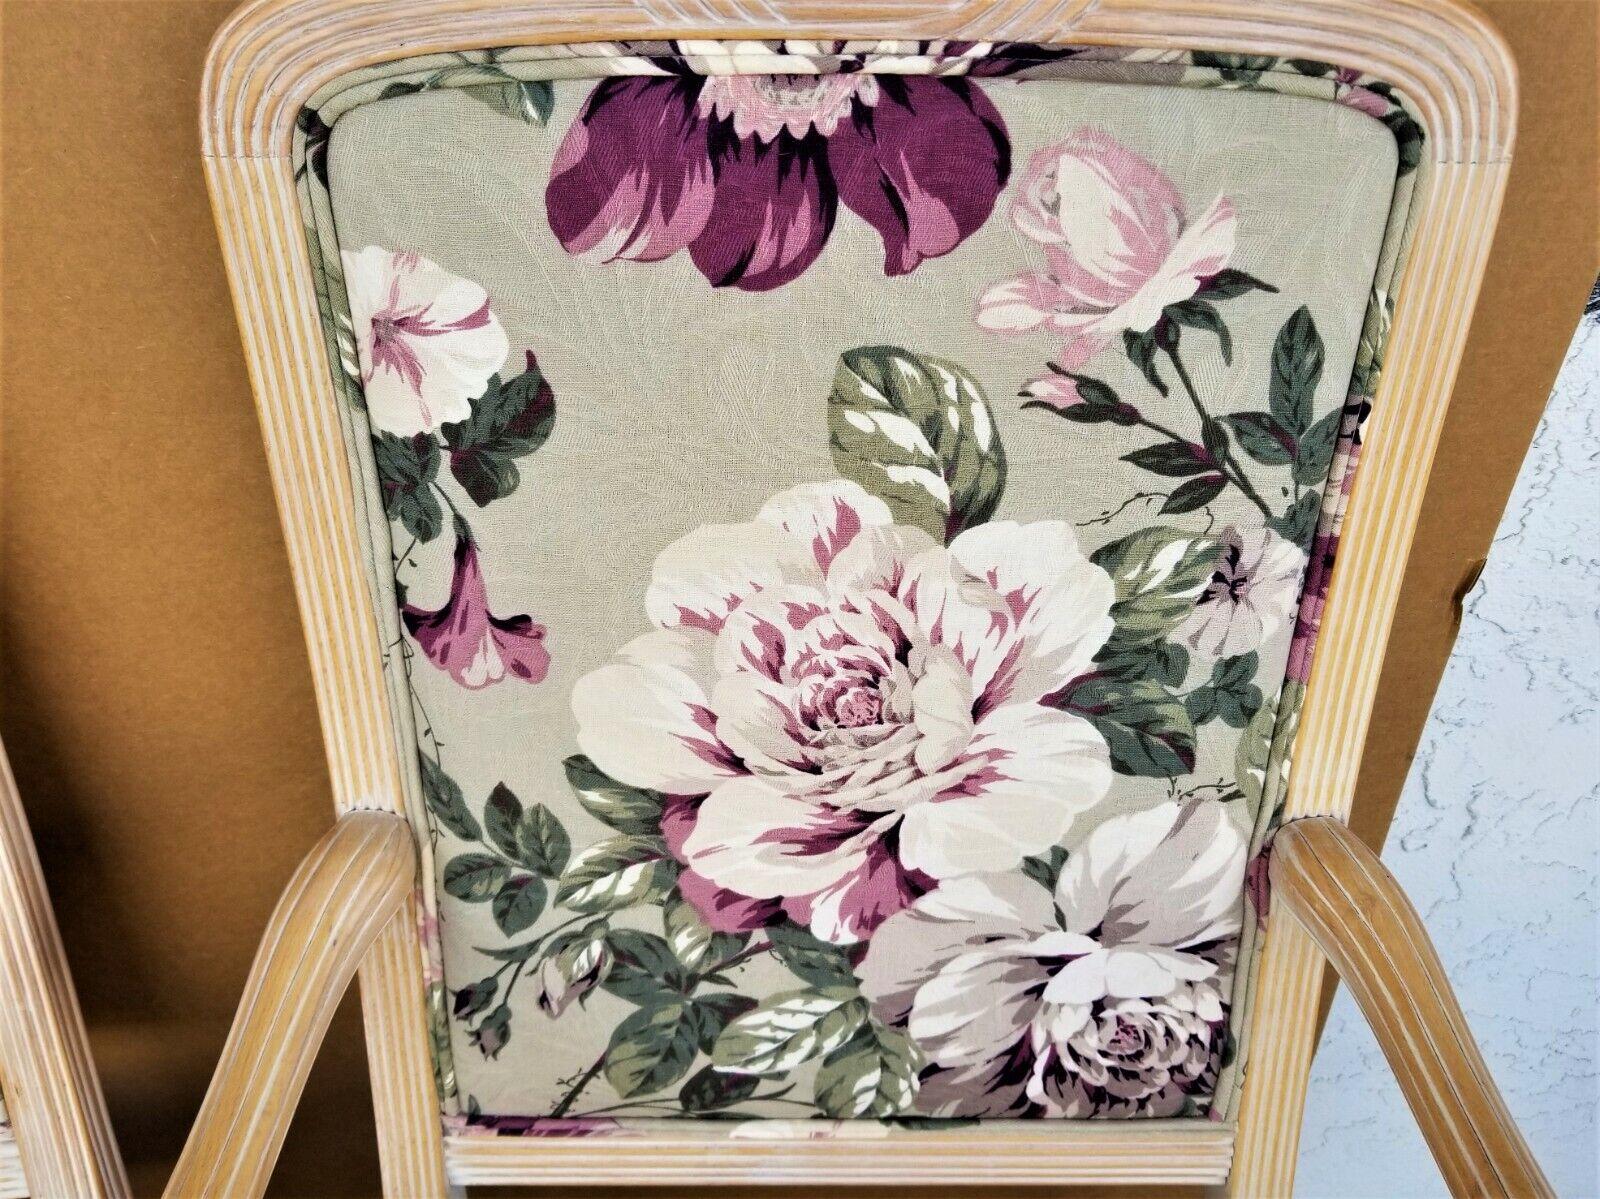 For FULL item description click on CONTINUE READING at the bottom of this page,
Offering One Of Our Recent Palm Beach Estate Fine Furniture Acquisitions Of A 
Solid Blonde Wood Chintz Roses Dining Chairs - Set of 4

Set includes 2 arm and 2 side